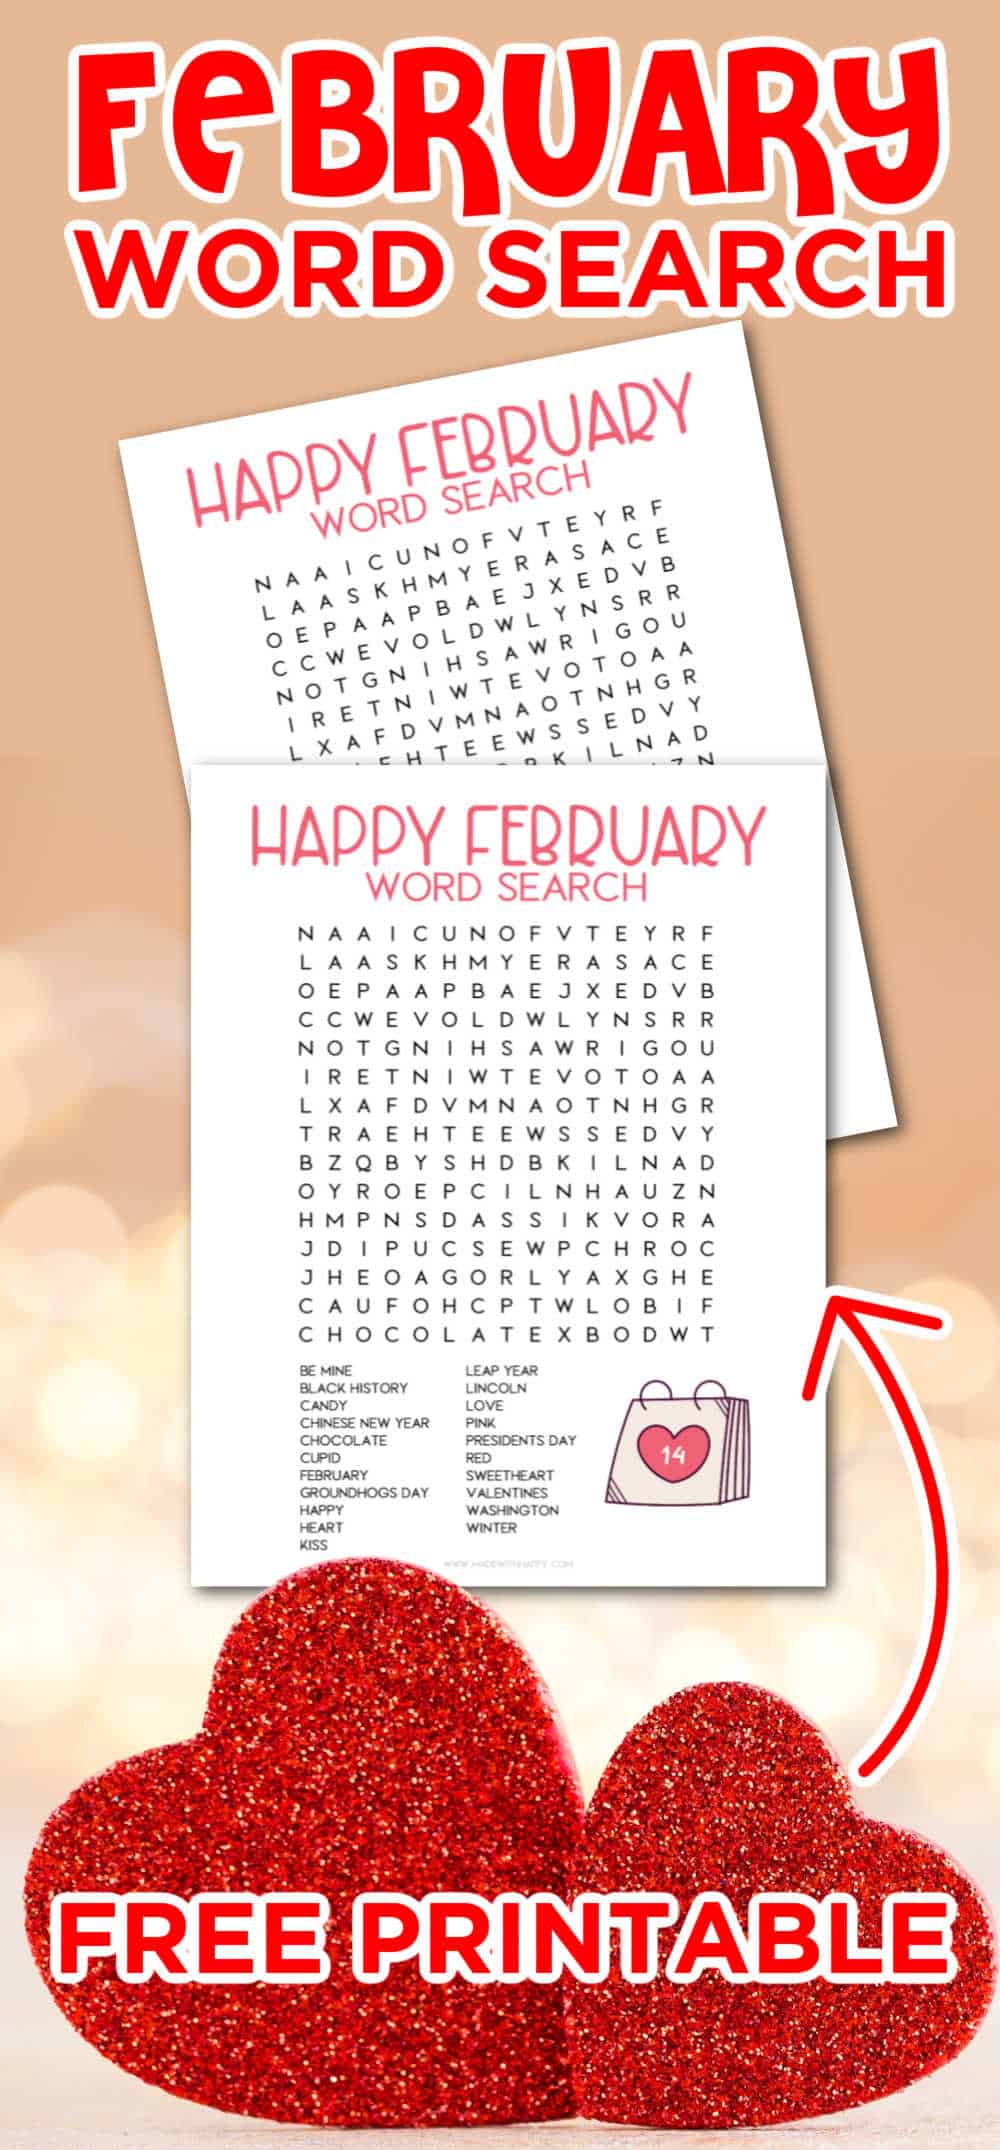 Free Printable February Word Search